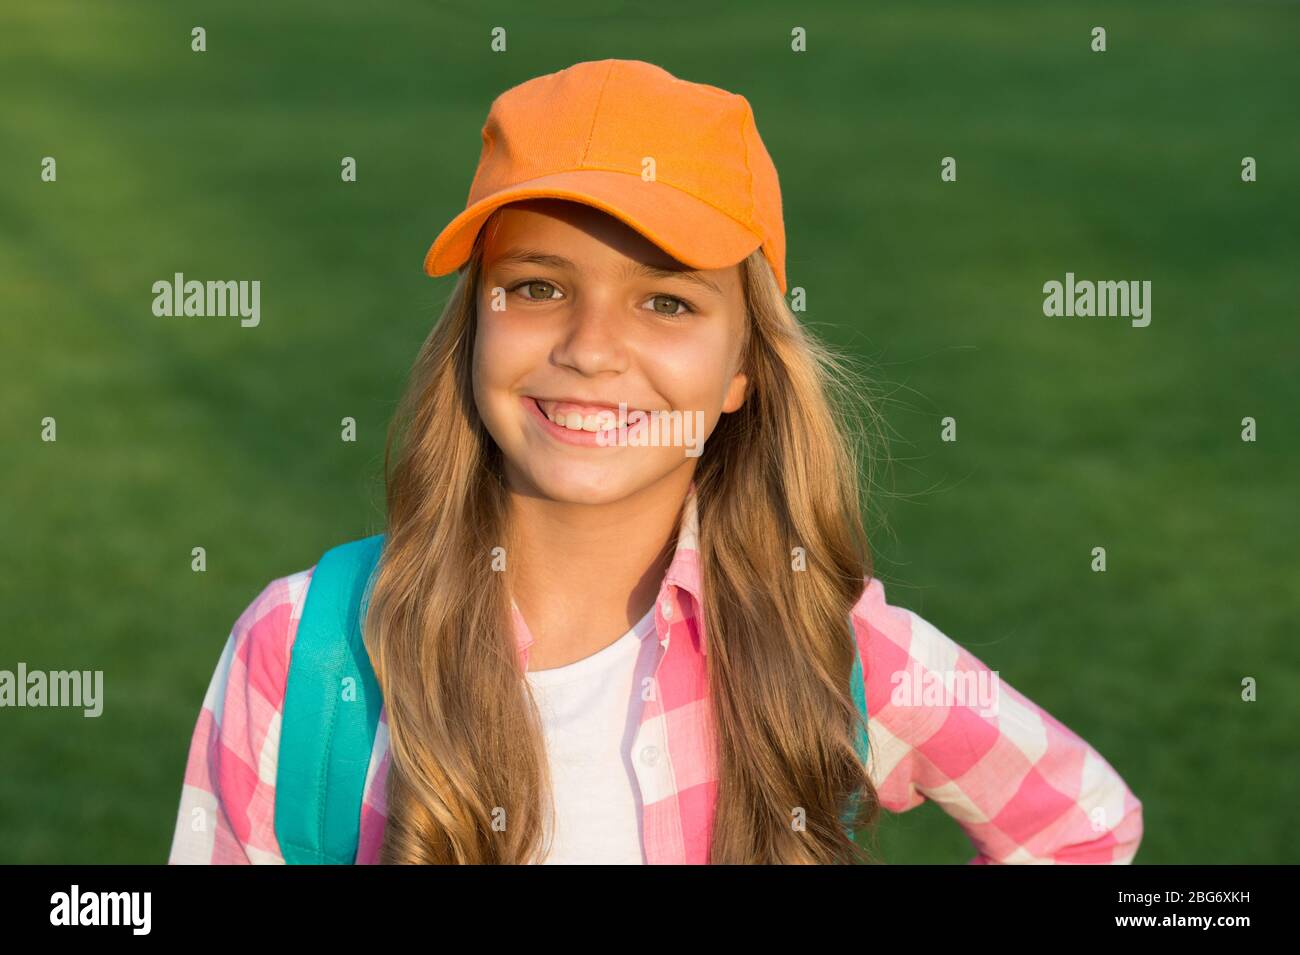 Her Style is a Lot More Casual. Happy Child in Casual Style Natural  Outdoors. Little Girl Wear Baseball Cap Stock Photo - Image of girl,  comfort: 191947756